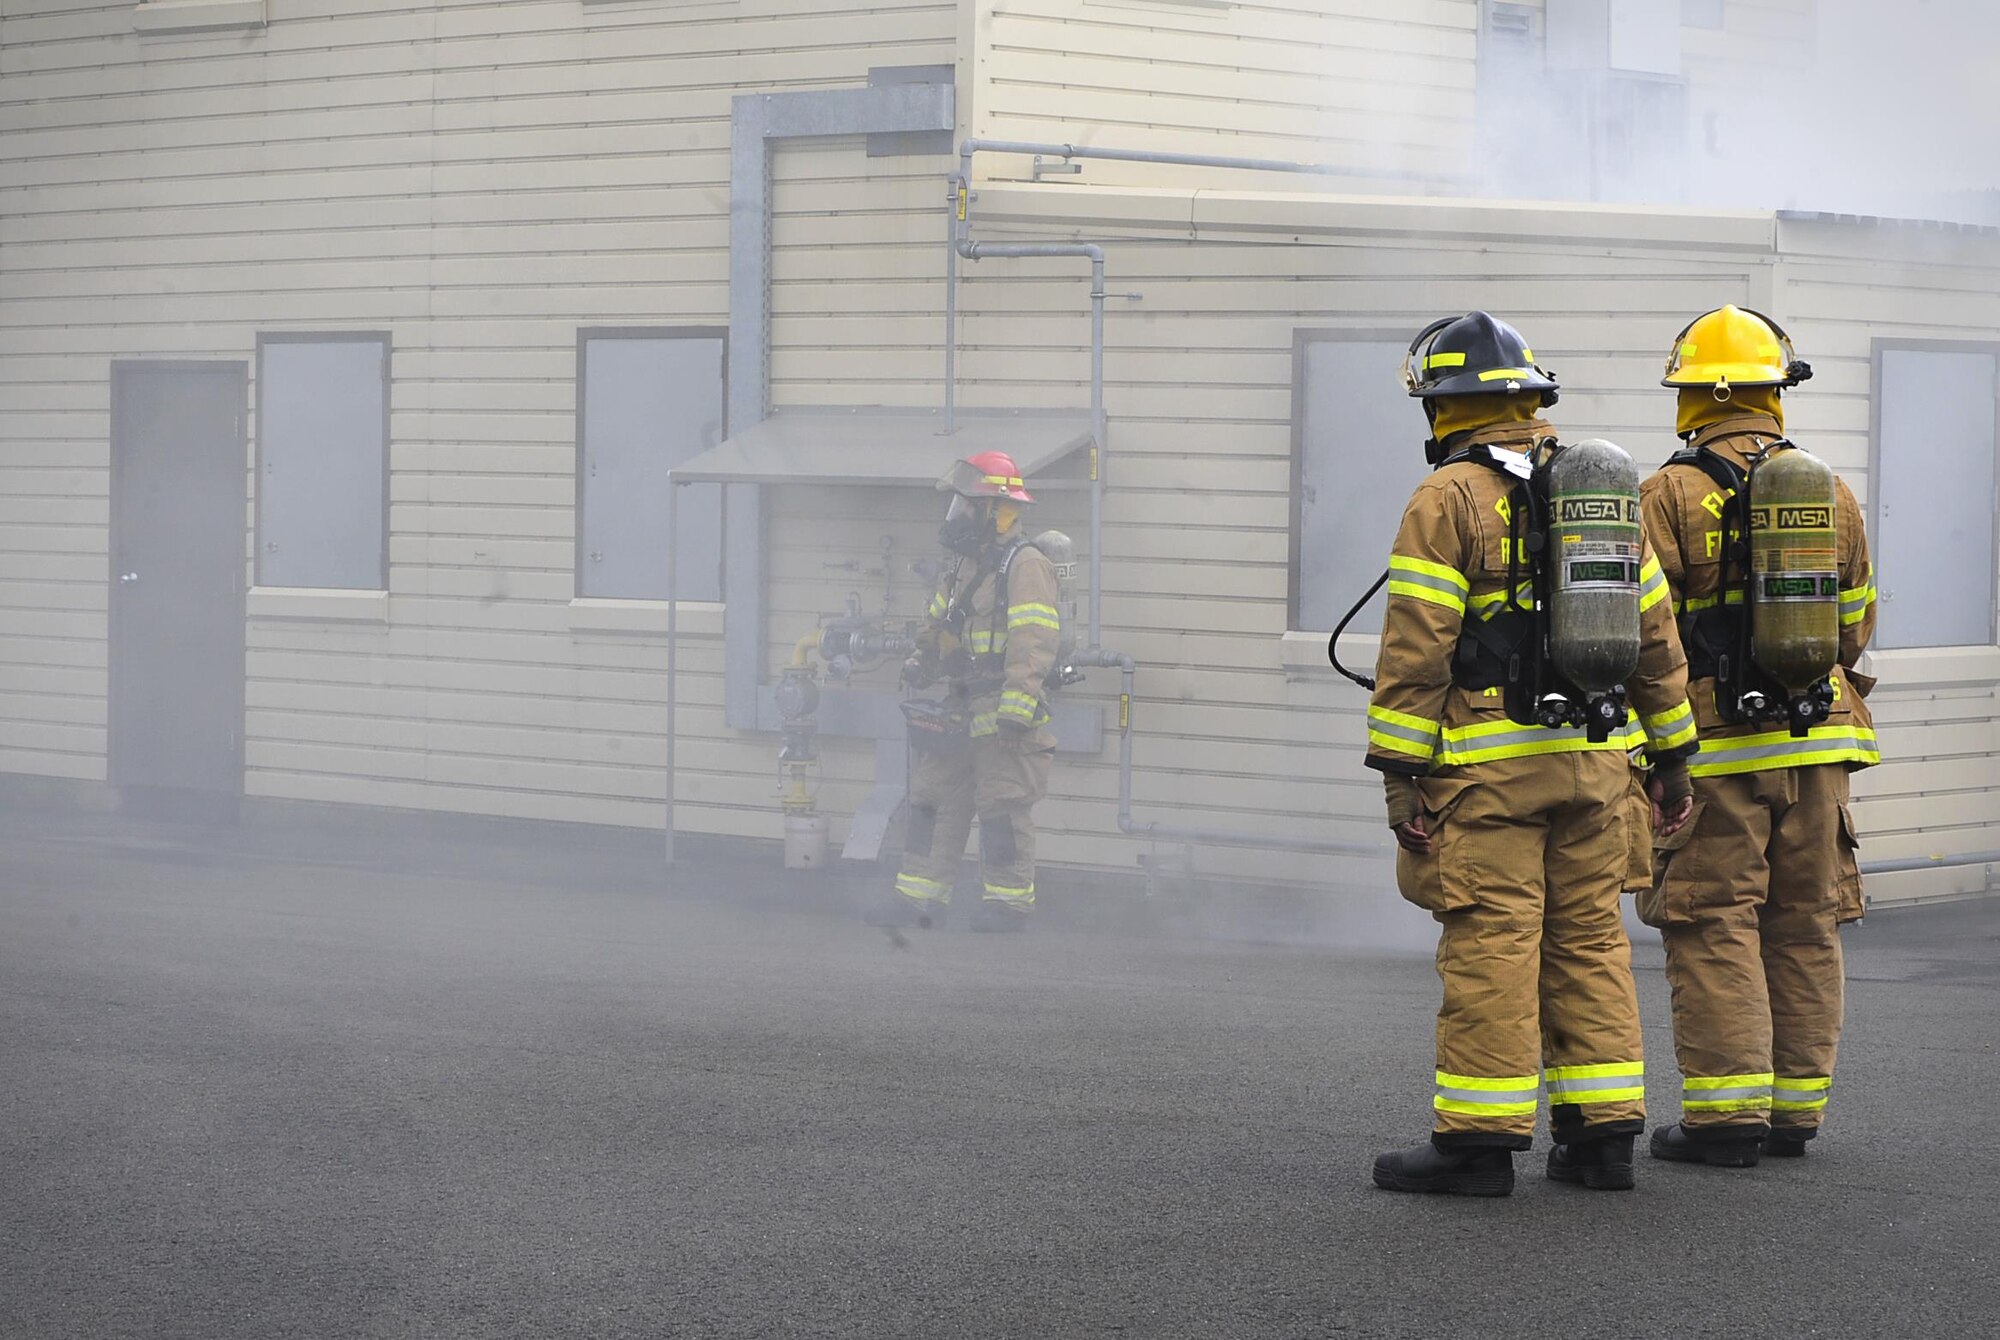 Airmen from the 86th Civil Engineer Squadron prepare to enter a simulated burning house during a biannual-training exercise June 2, 2016, at Ramstein Air Base, Germany. The 86th CES Airmen provide fire emergency services to Ramstein Air Base, Vogelweh Military Complex, Rhine Ordinance Barracks and Landstuhl military sites (U.S. Air Force photo/Senior Airman Larissa Greatwood)